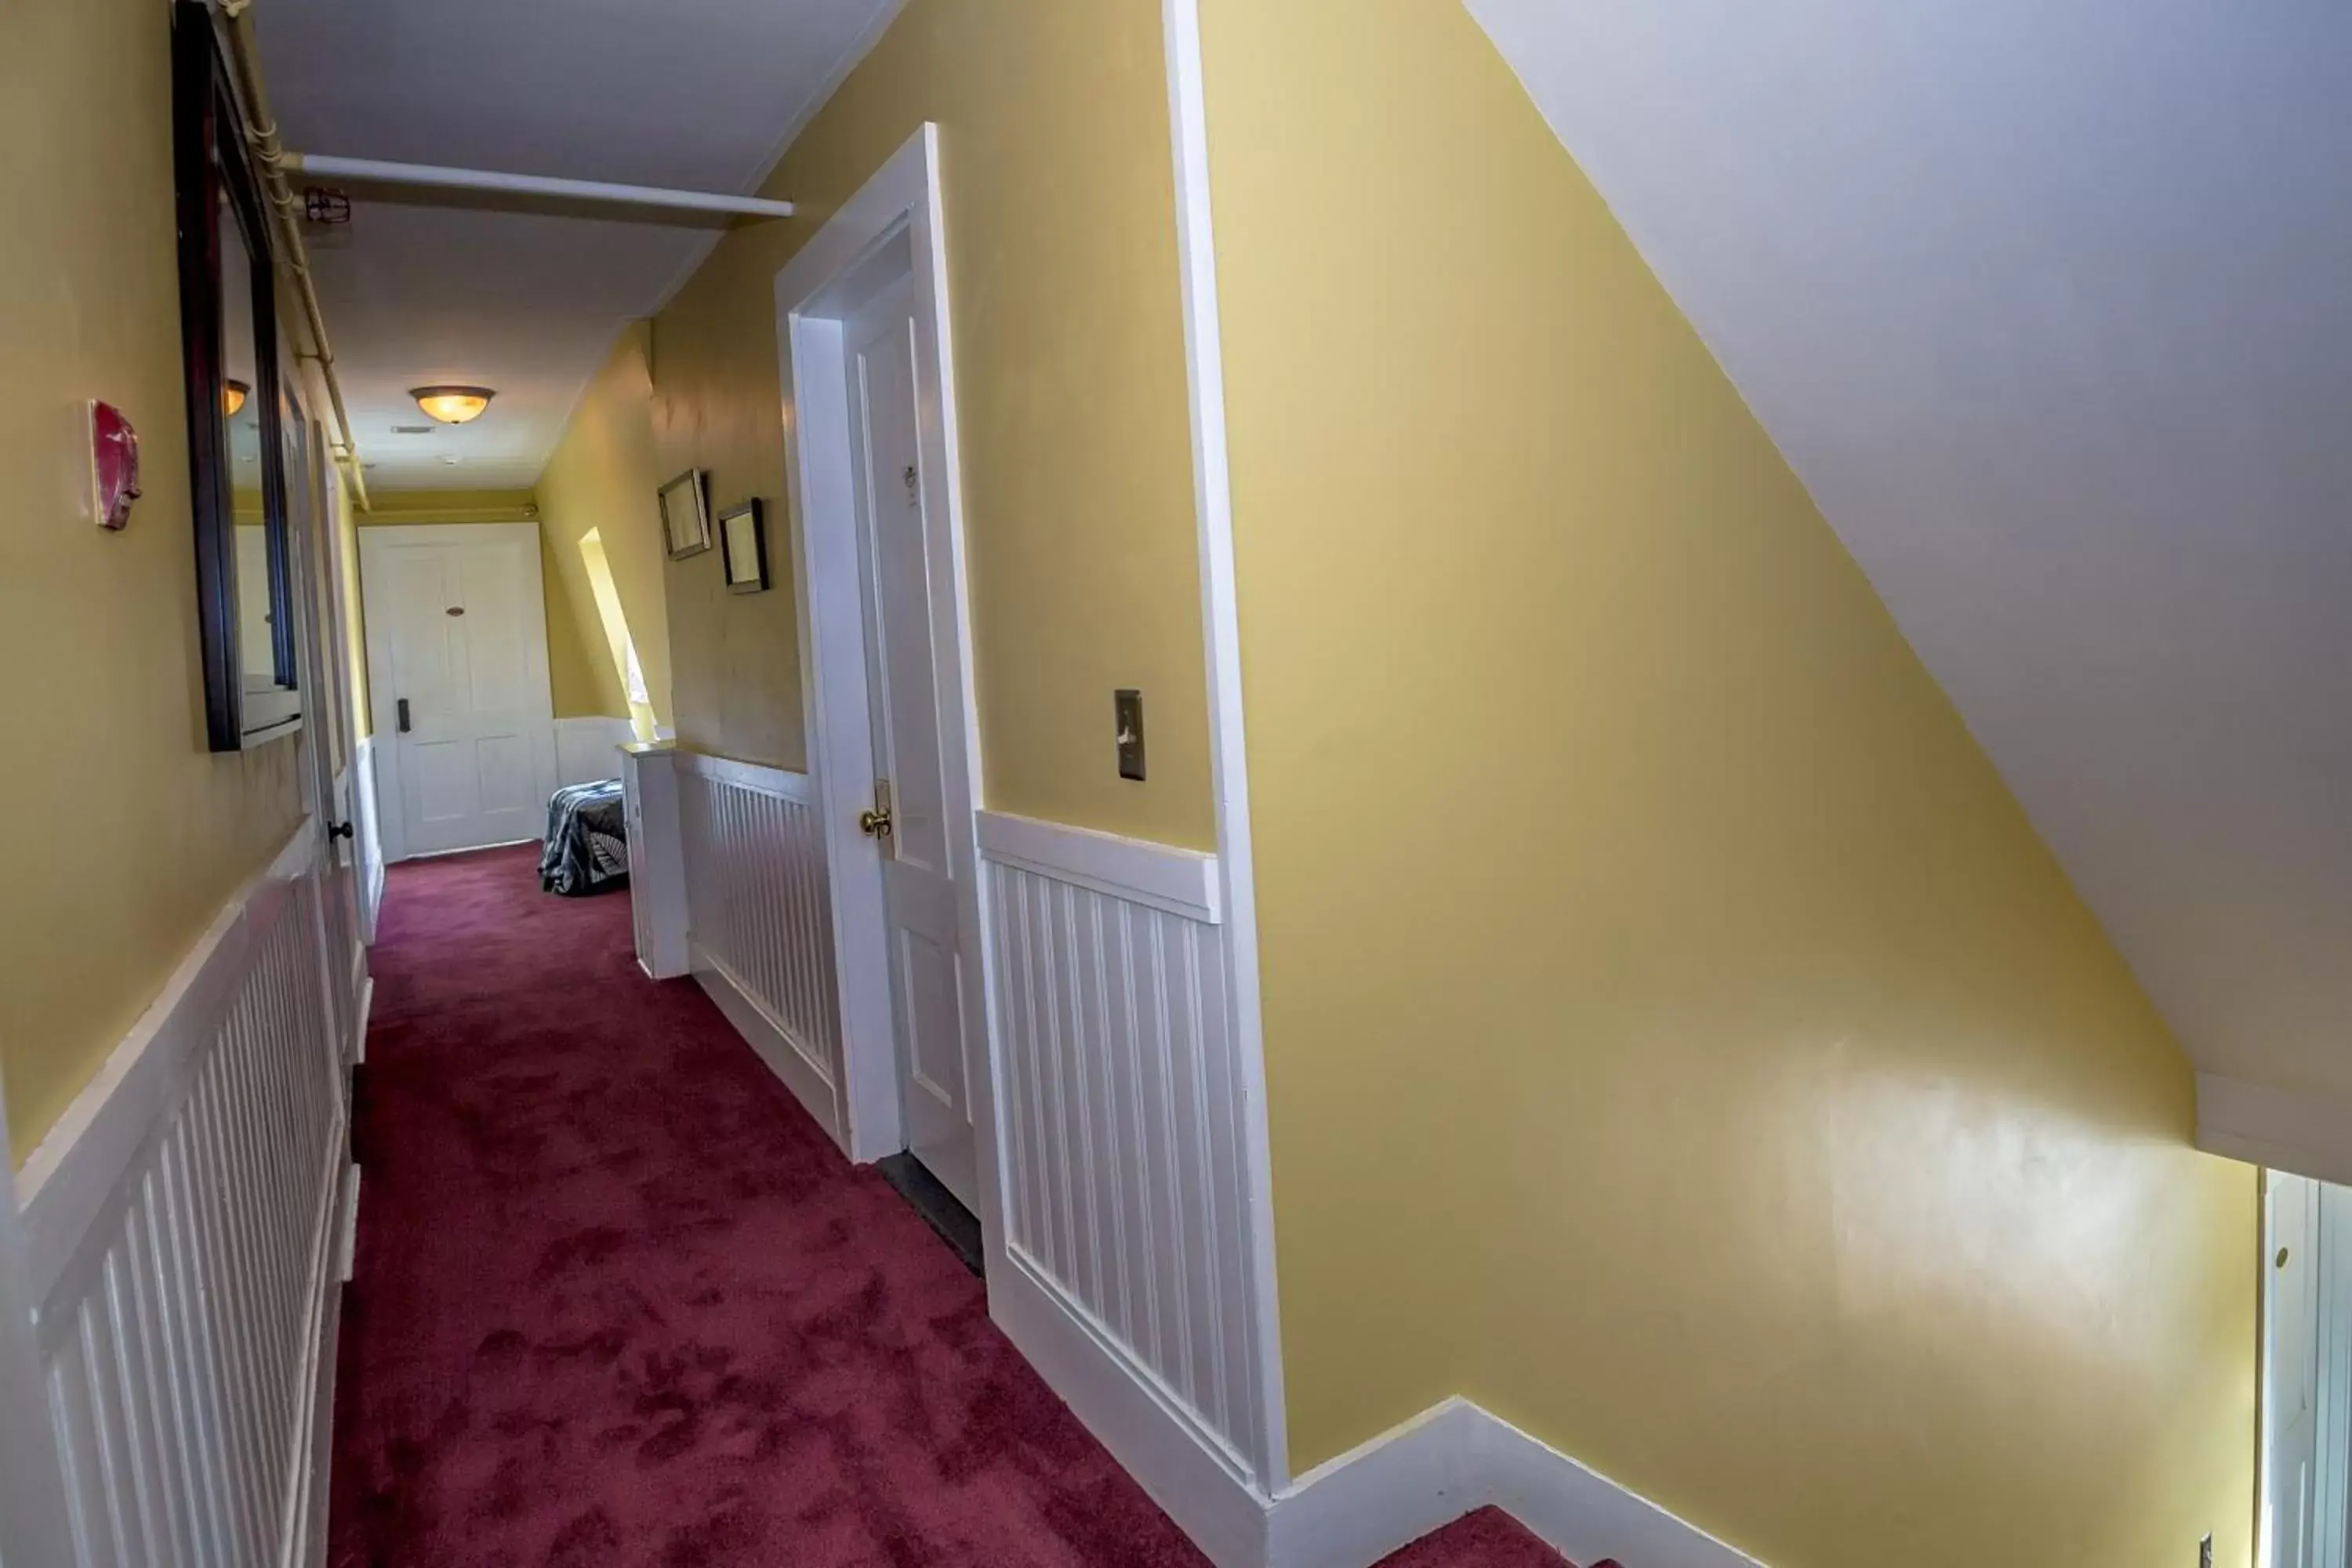 Area and facilities in Cranmore Inn and Suites, a North Conway boutique hotel